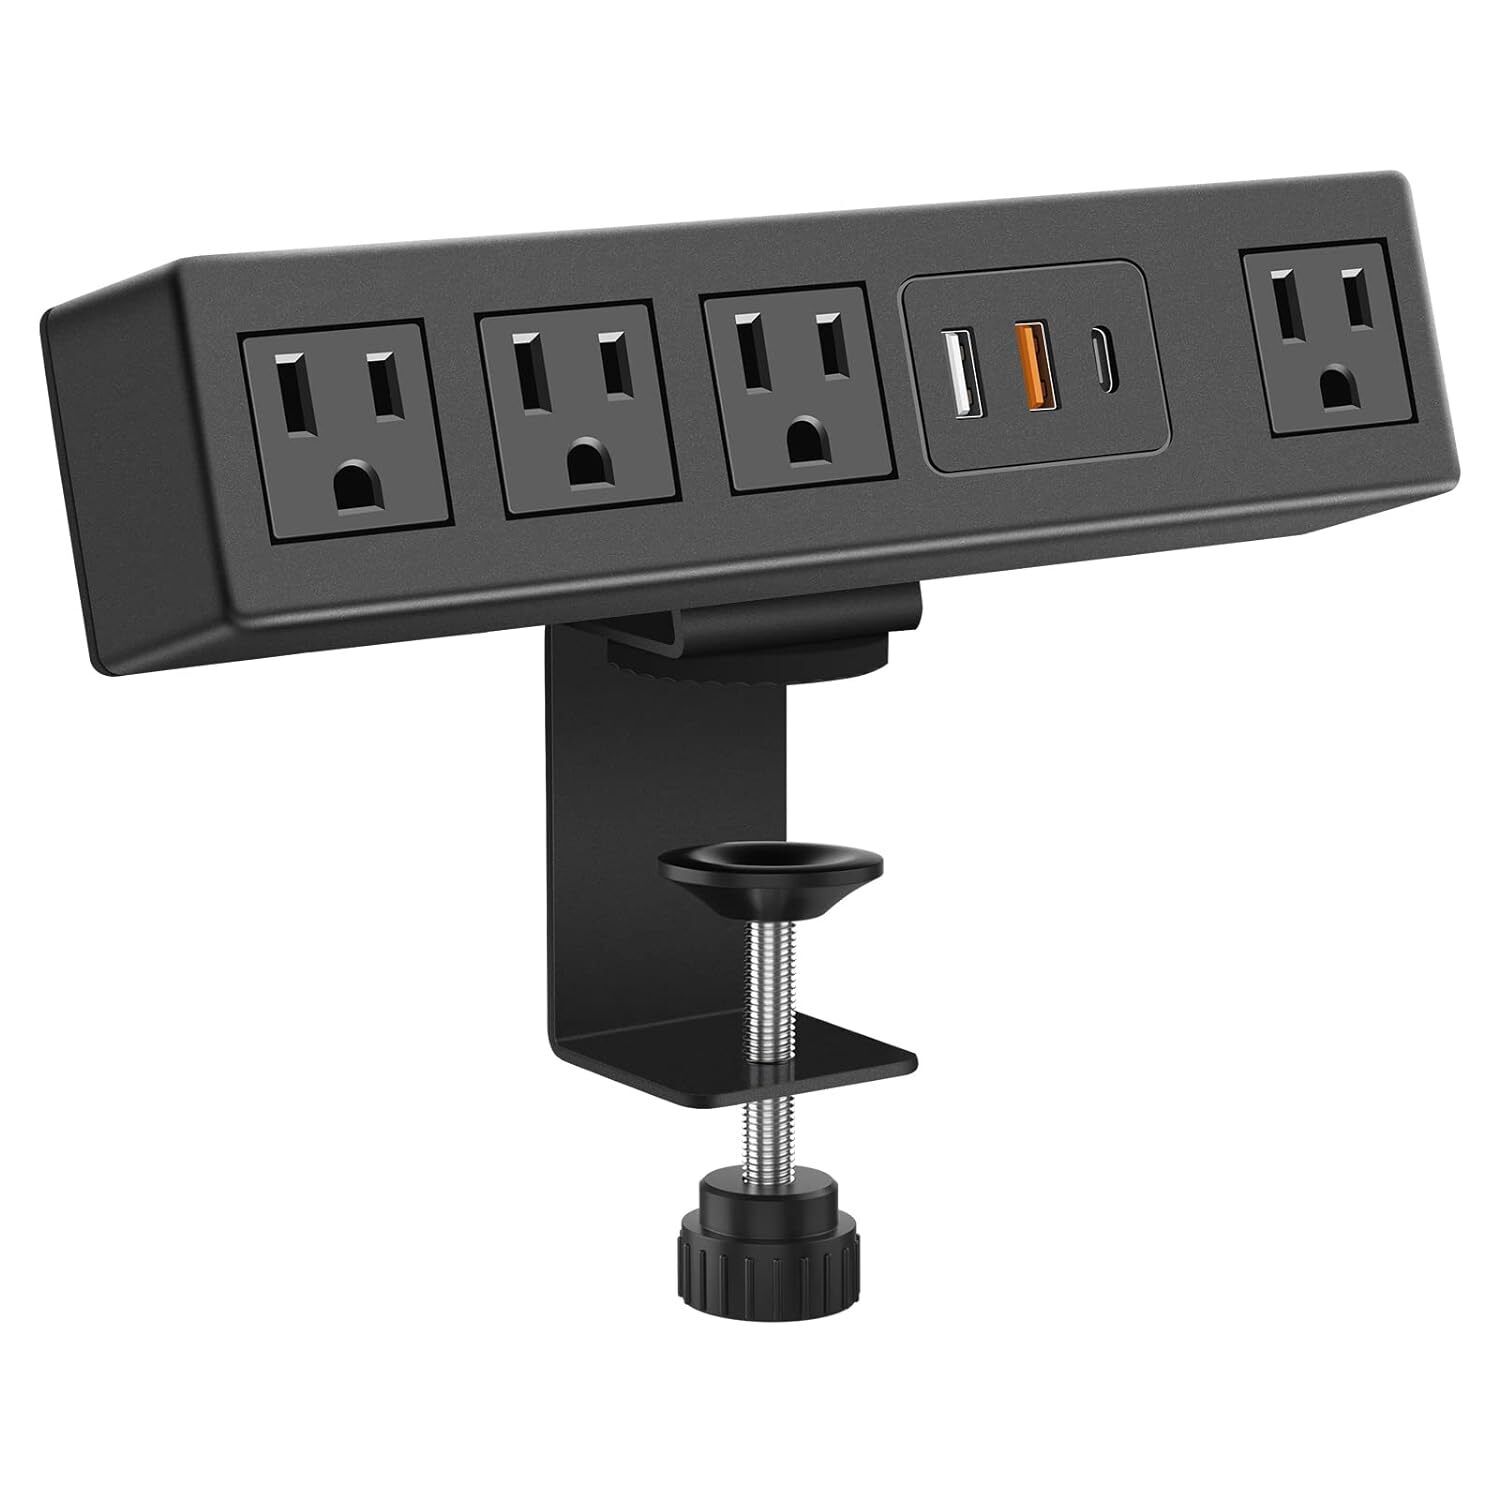 Desk Clamp Power Strip With Usb-A And Usb-C Ports, Desktop Mount Surge Protect